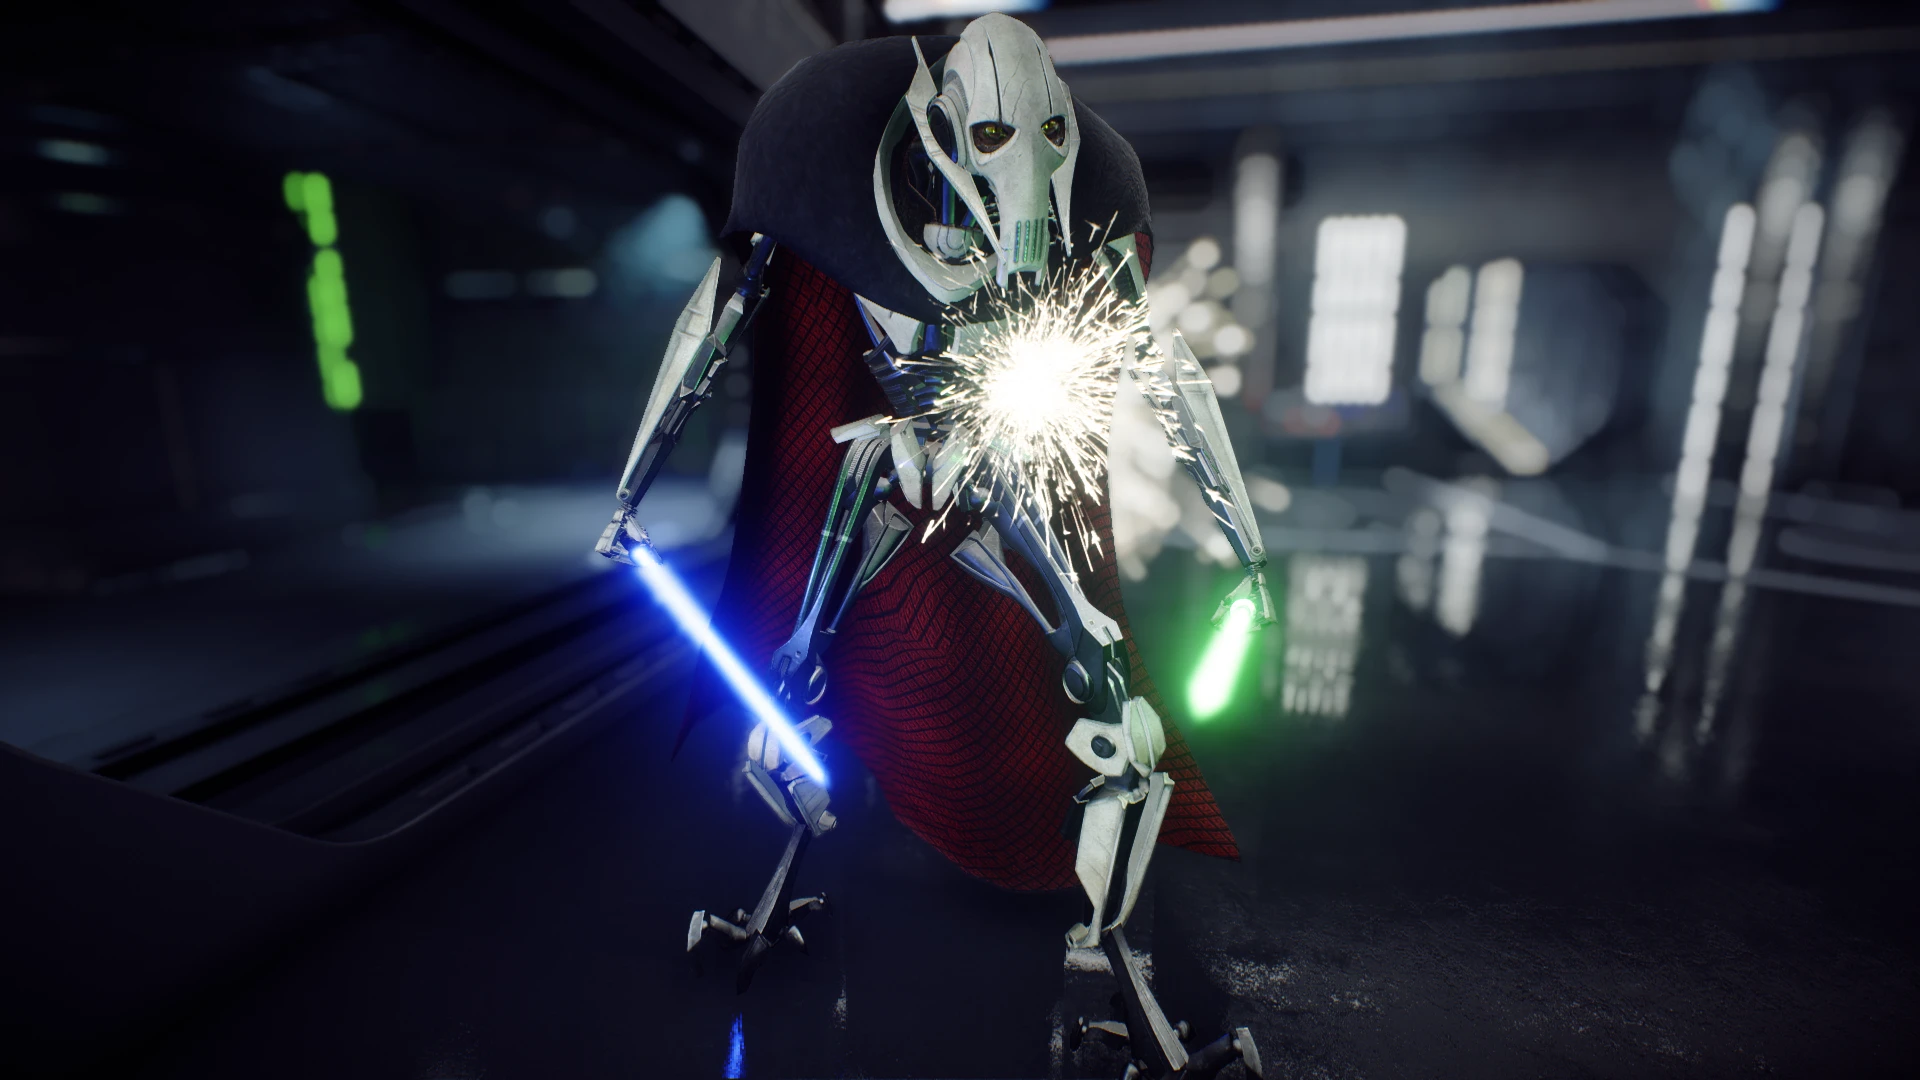 Caped Grievous 2 0 Update Out Now At Star Wars Battlefront Ii 2017